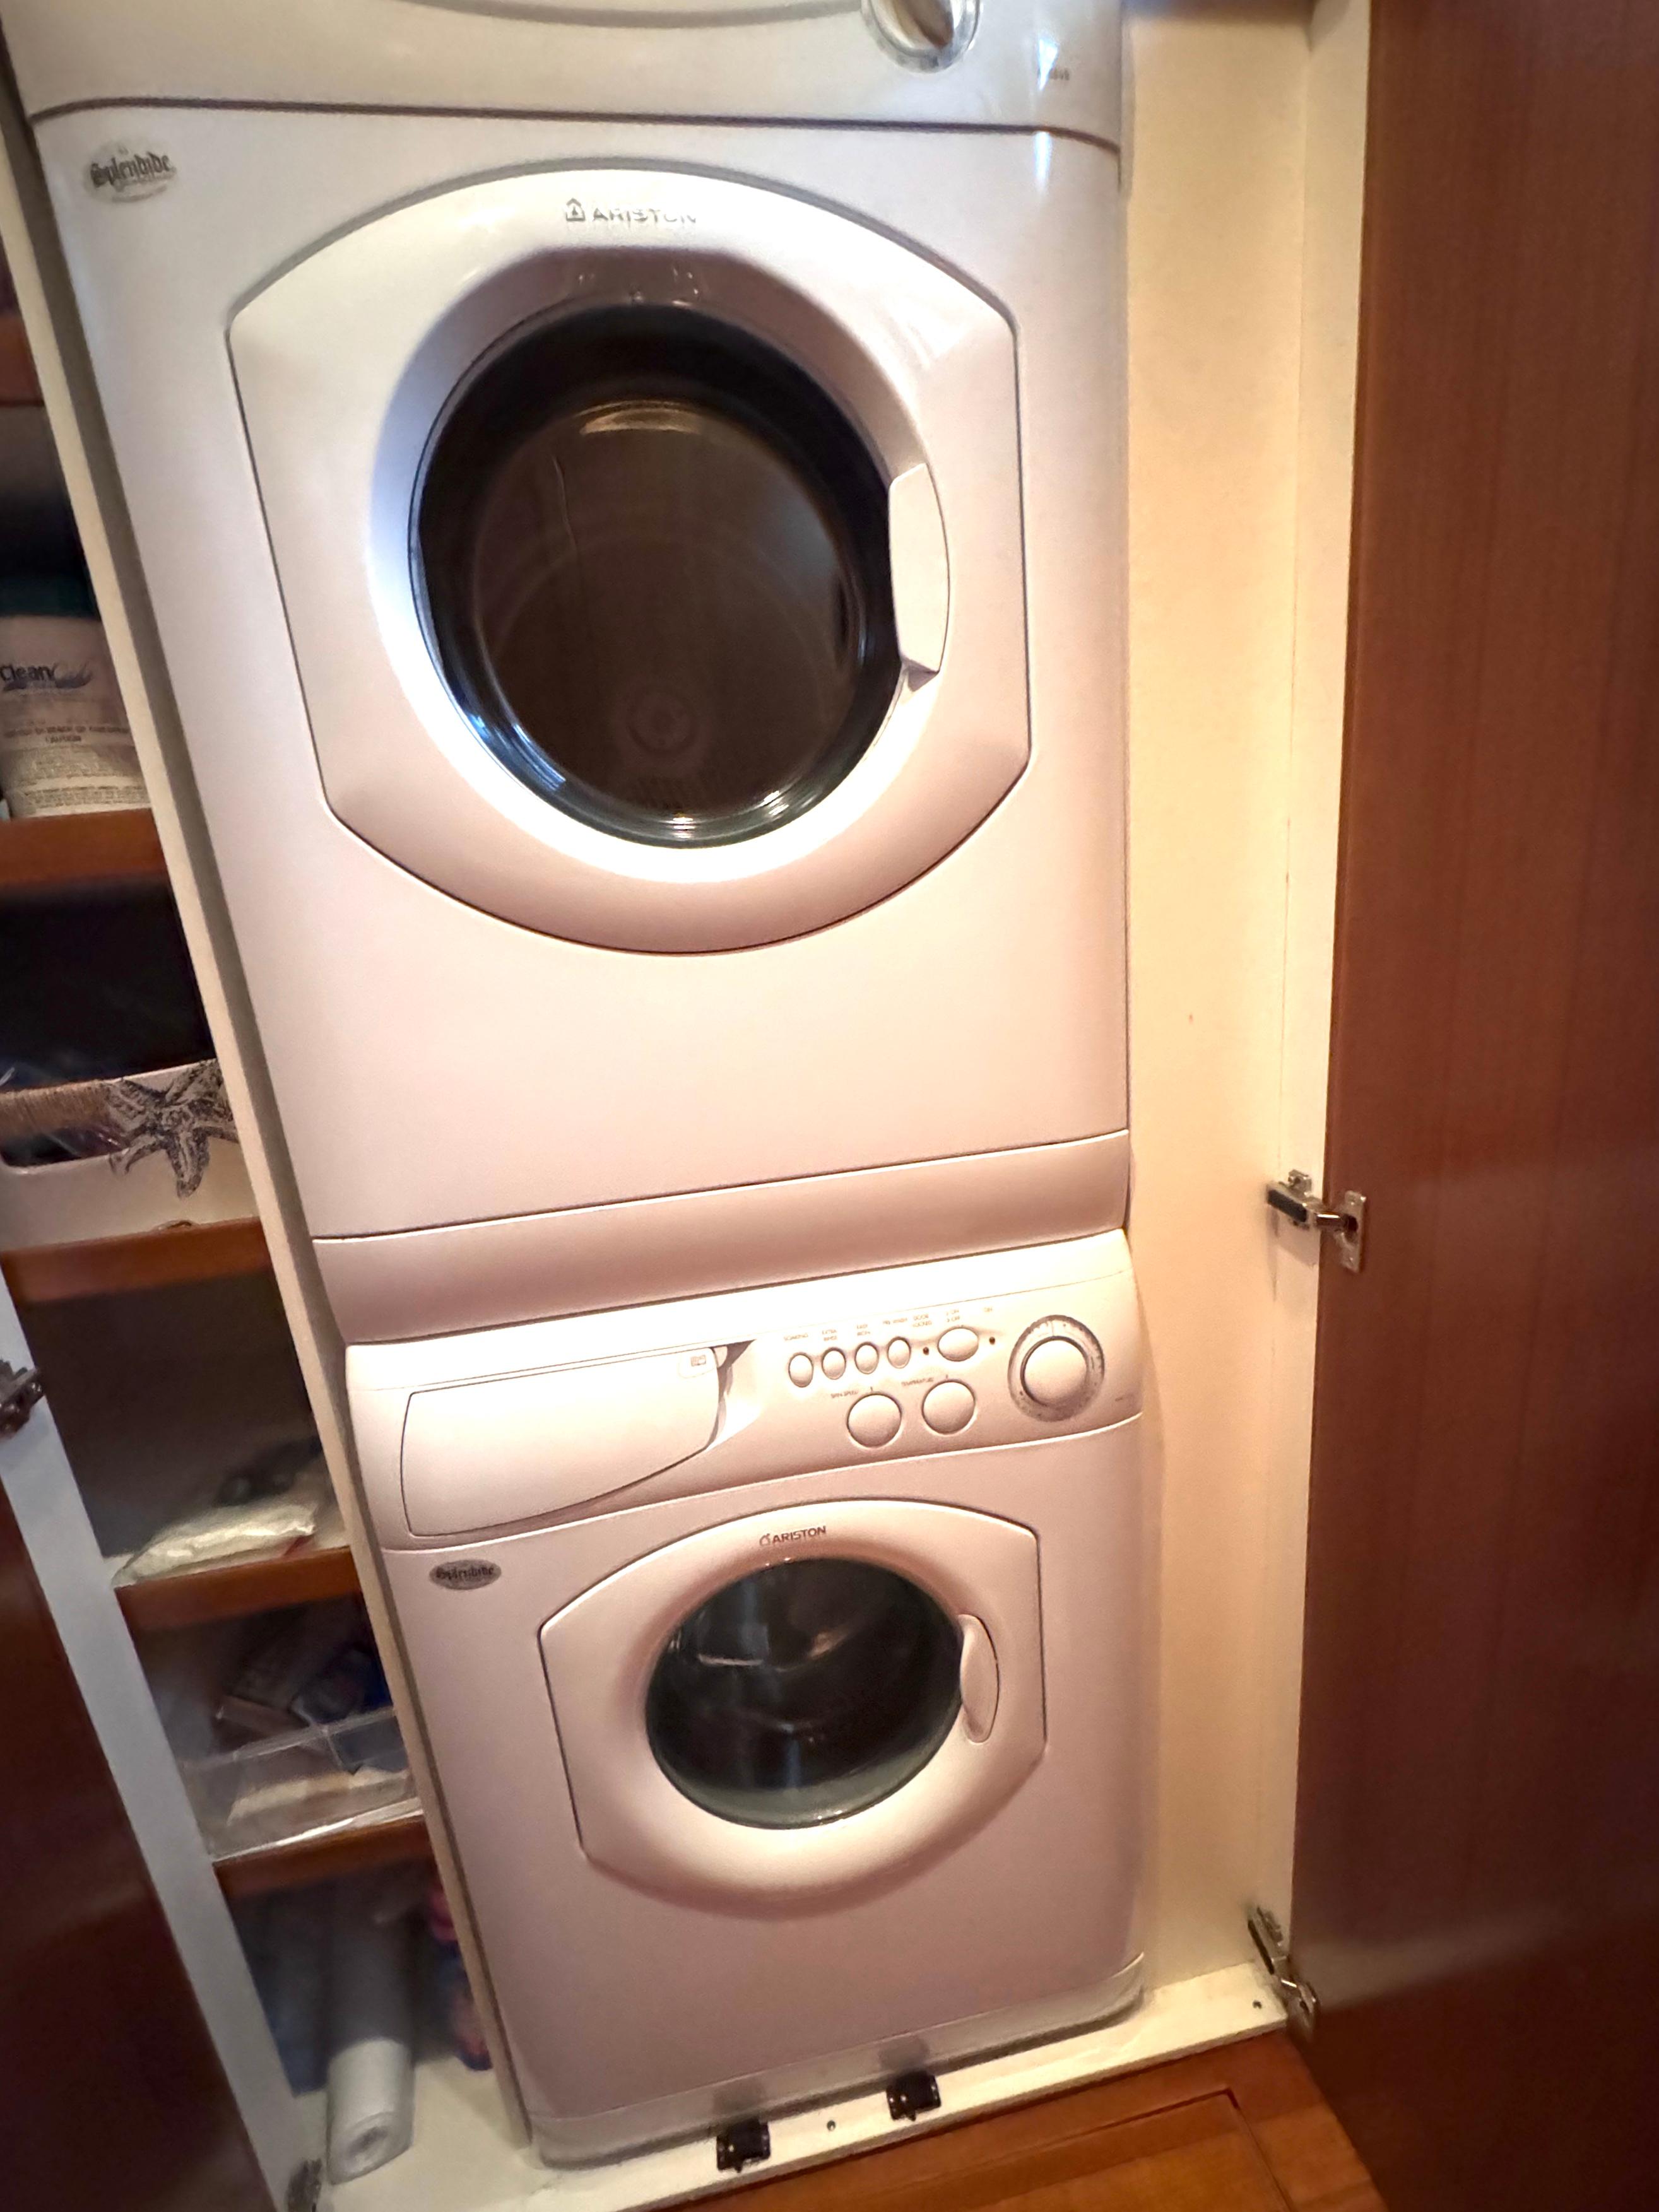 Washer and dryer separates